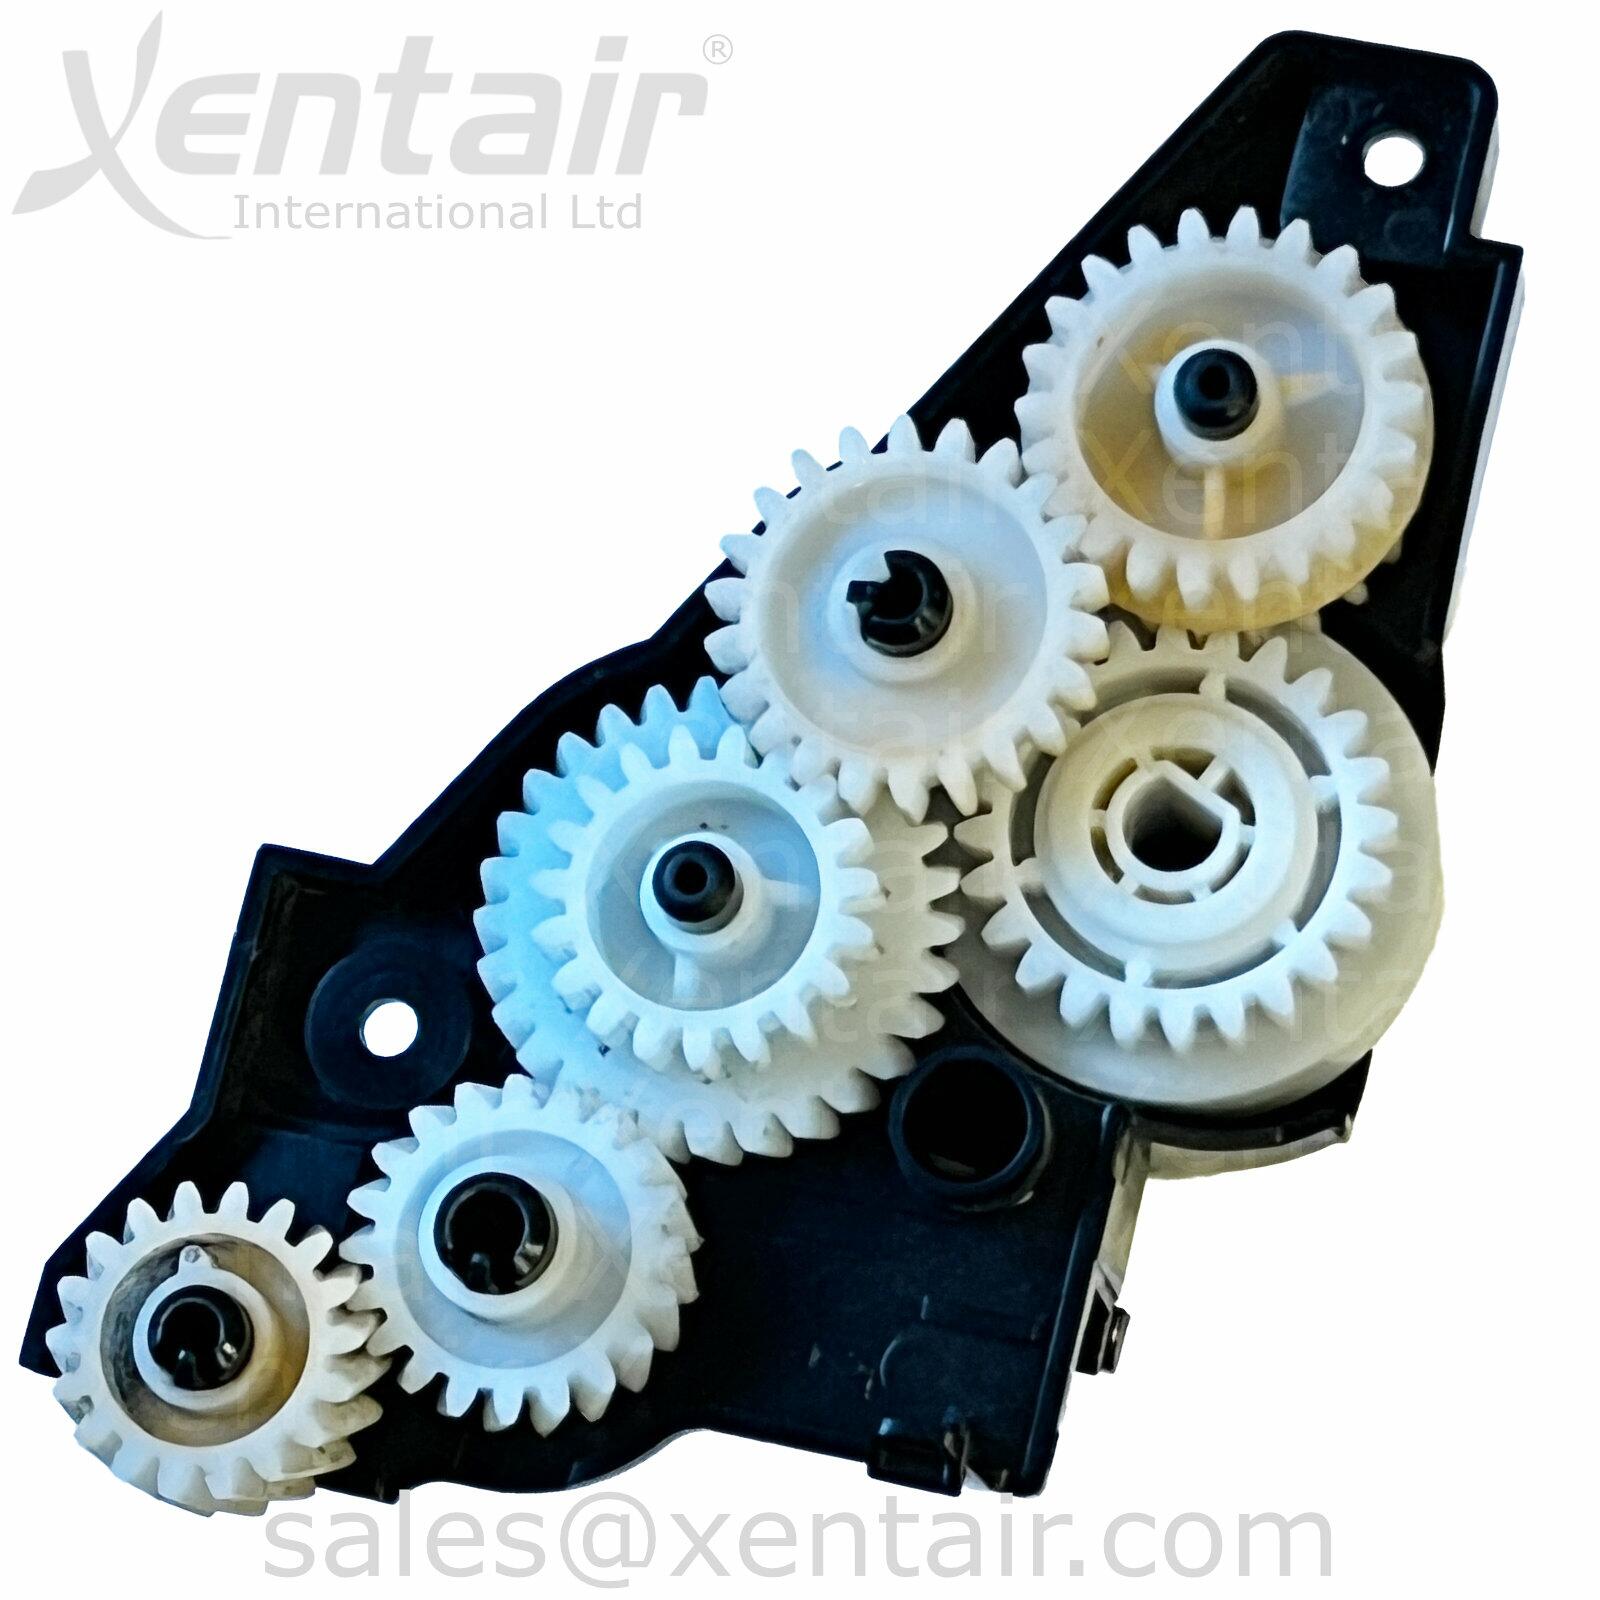 Xerox® VersaLink® B400 B405 Exit Out Drive Holder Assembly 007K18912 7K18912